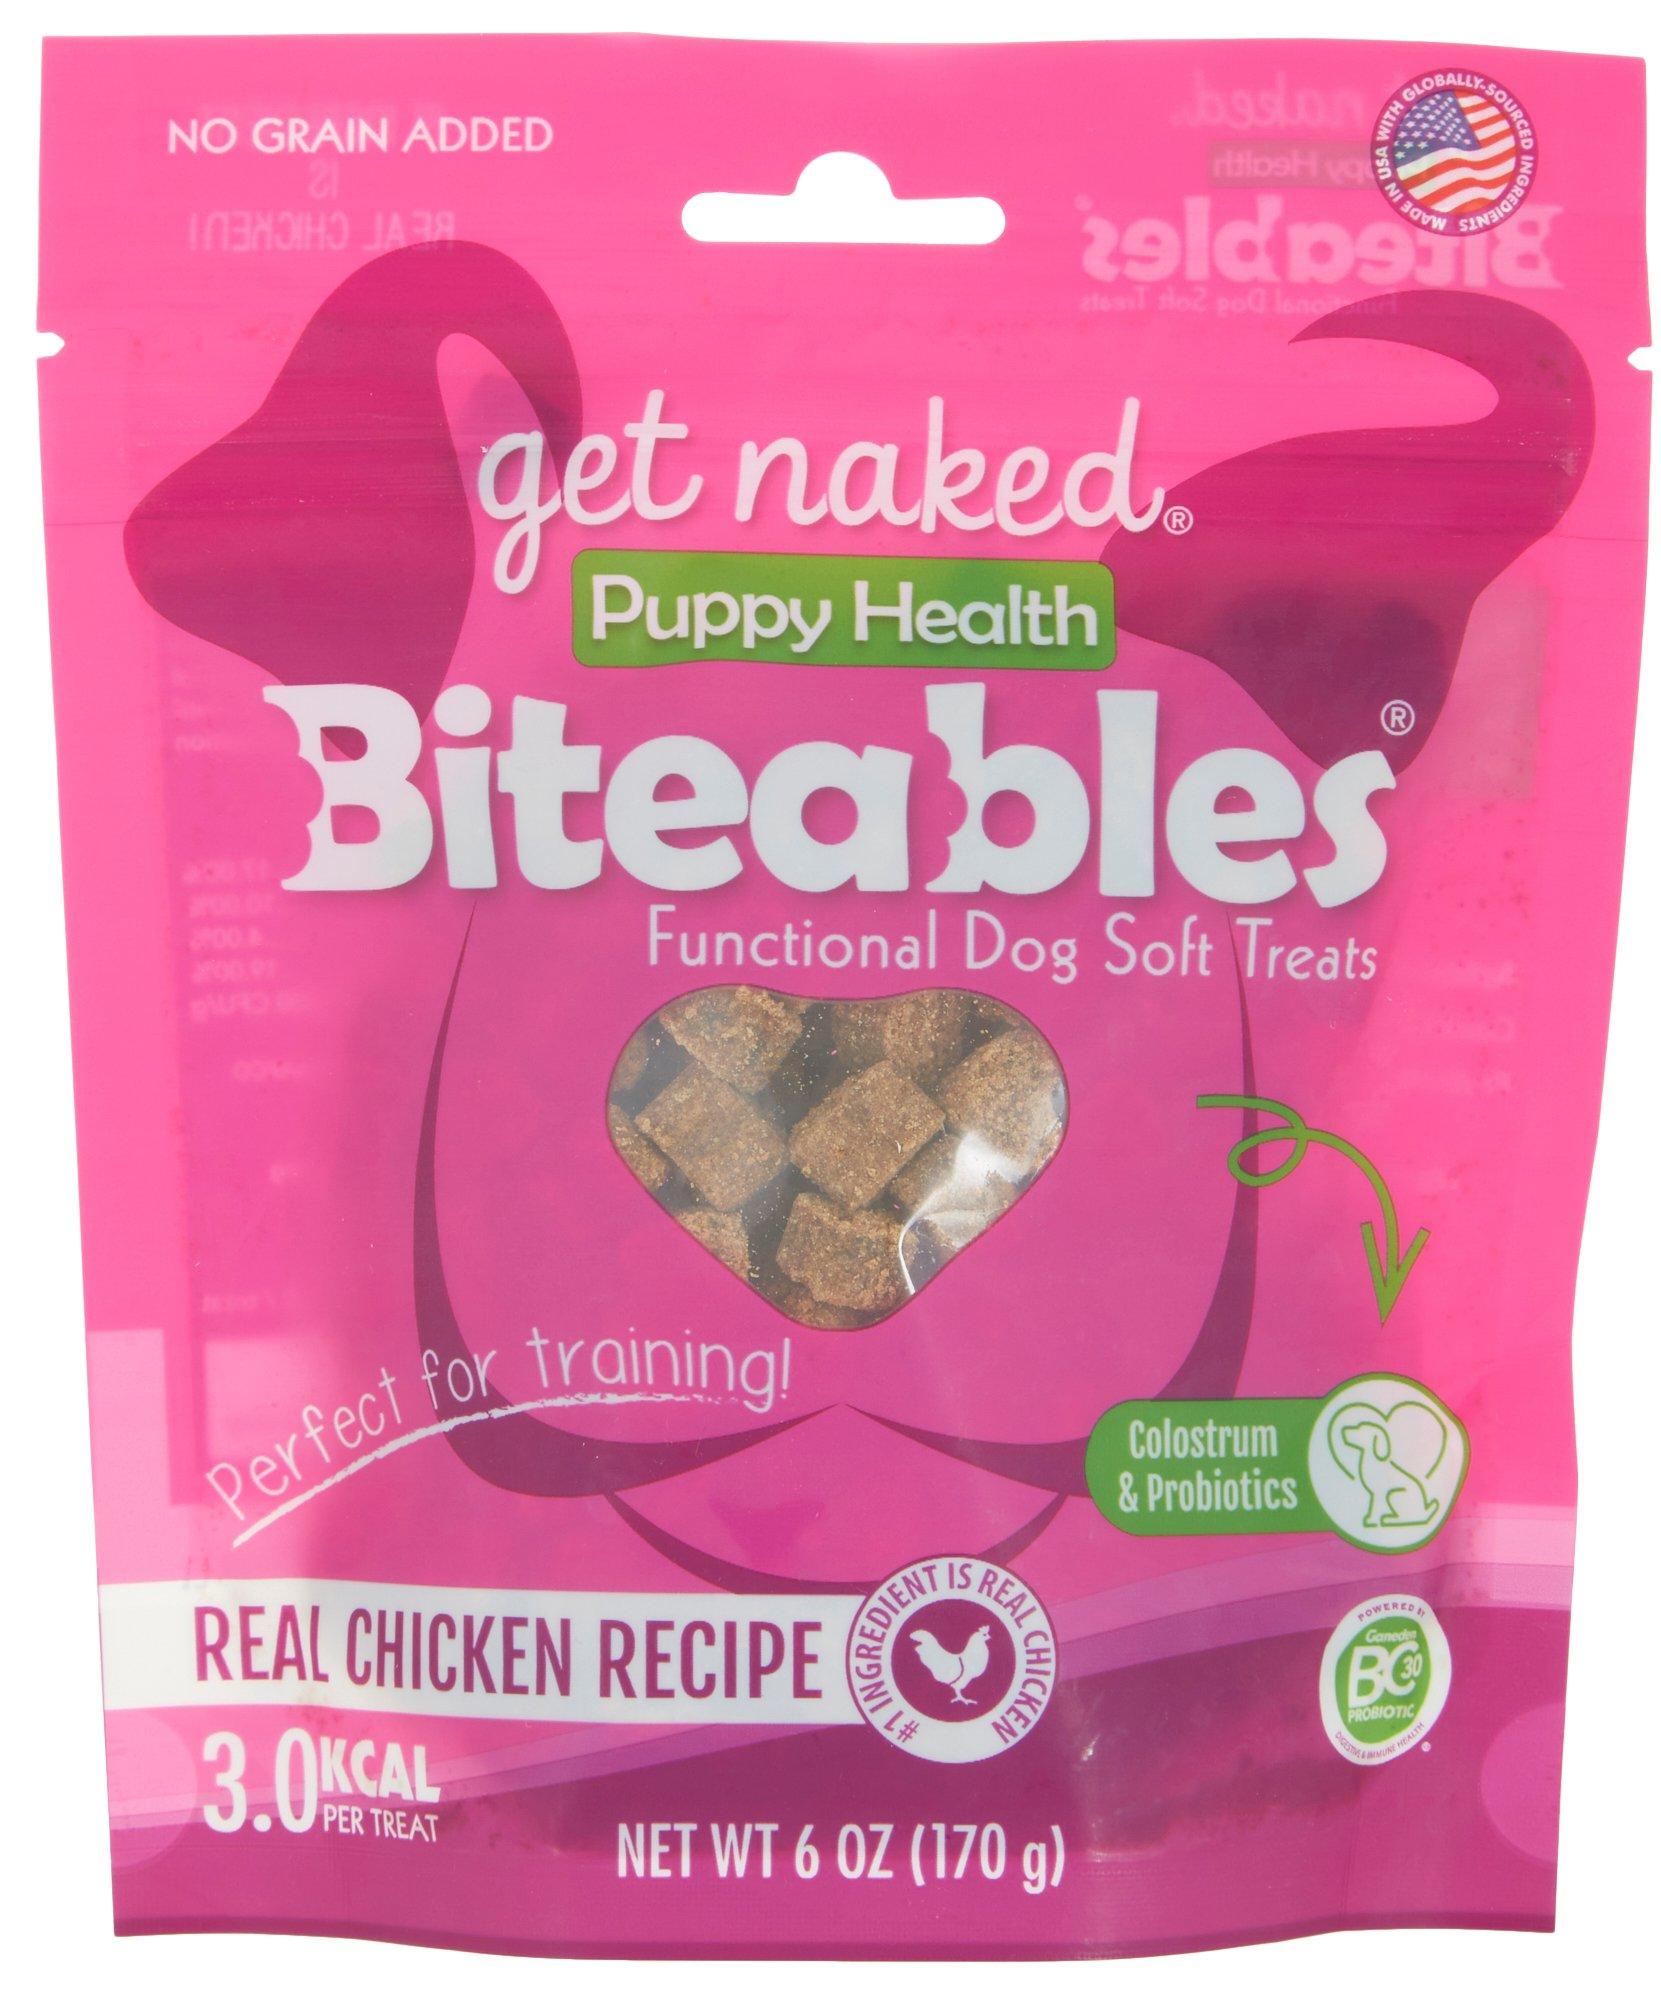 Puppy Health Biteables Functional Dog Soft Treats